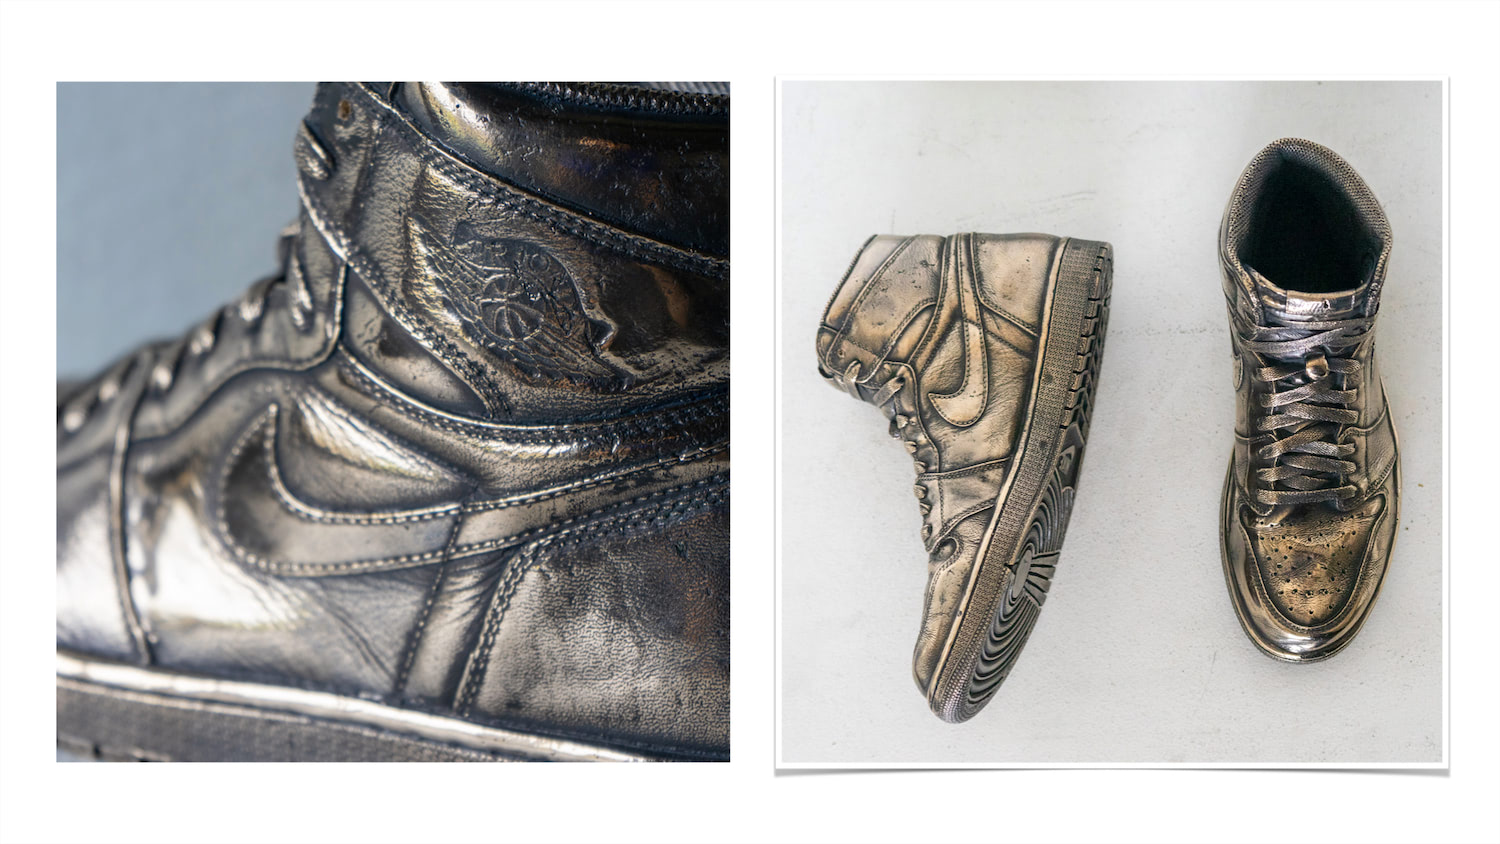 Creases and grain of leather are preserved in polished bronze, molded from worn metallic blue Air Jordan 1's.